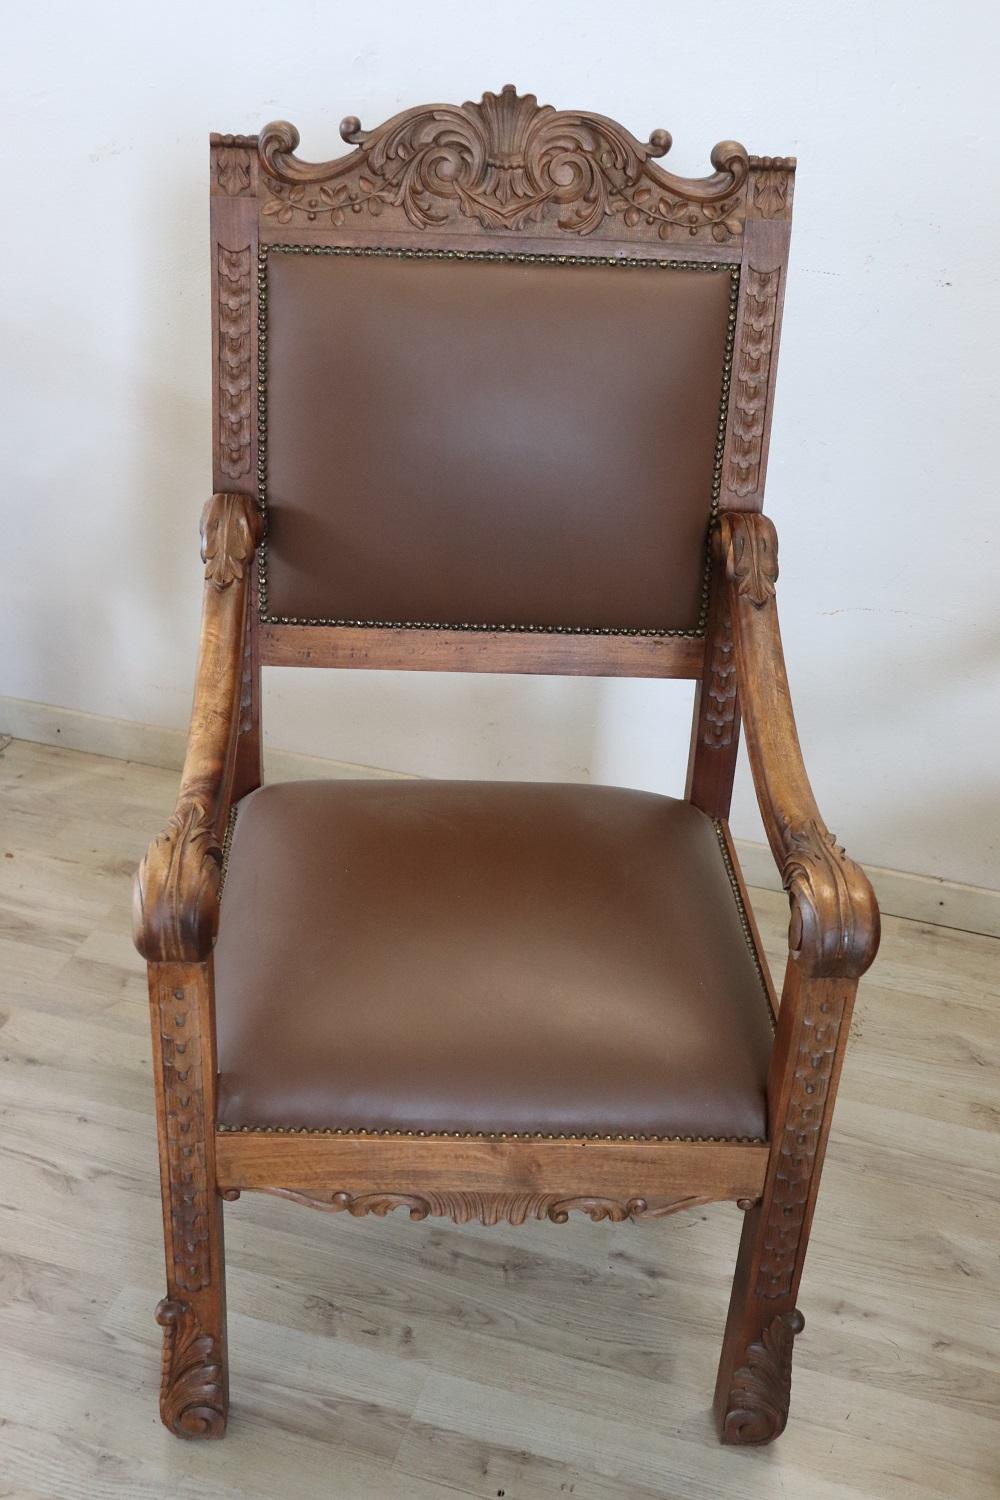 Impressive rare pair of throne chairs in perfect Italian Renaissance style, late 19th century. Made of solid walnut wood. The finely carved wooden backrest with very complex decoration. Note how the decoration carved in the wood is also present on